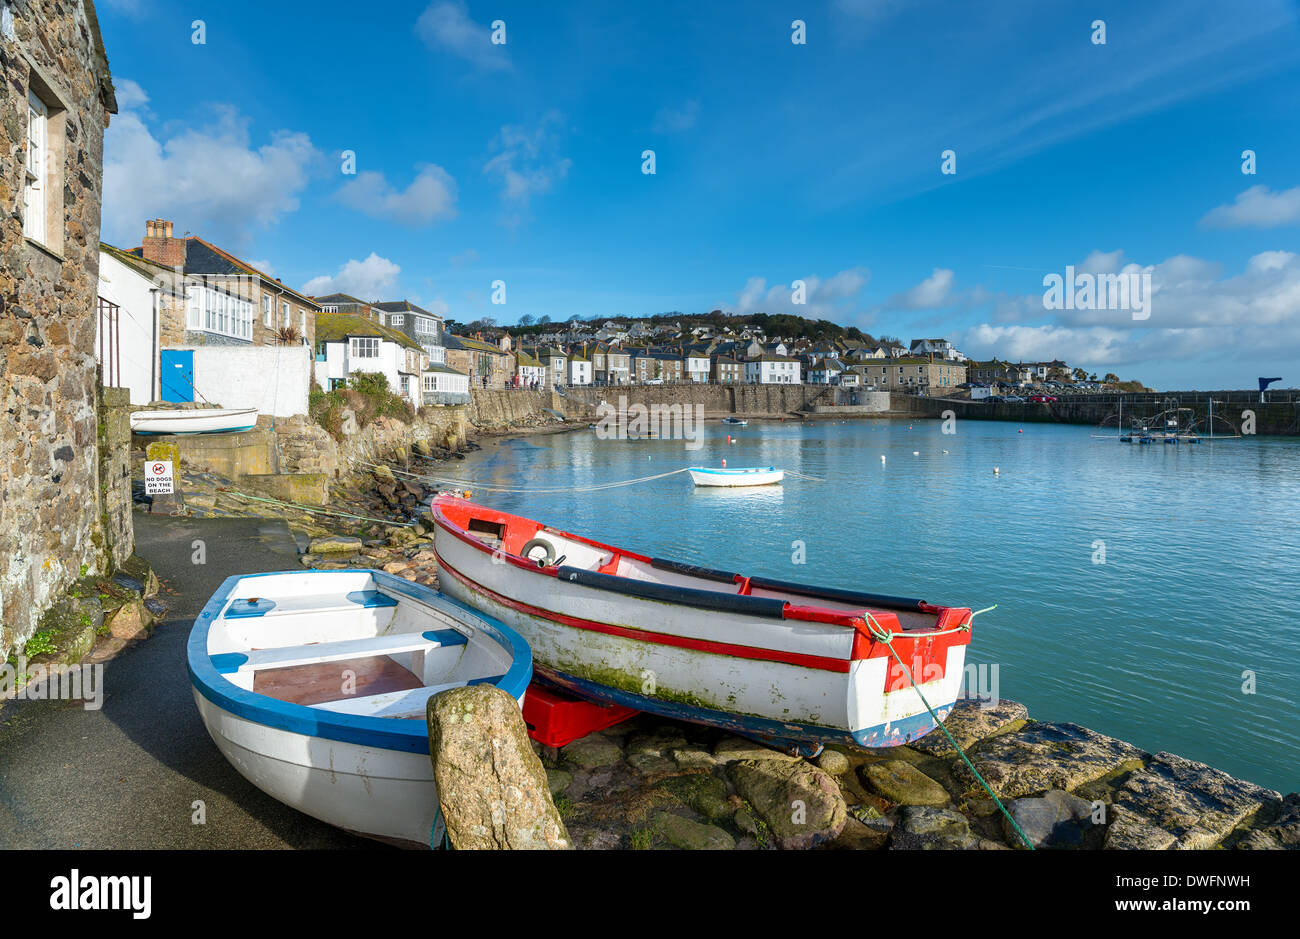 The harbour at Mousehole in Cornwall, a traditional fishing village near Penzance. Stock Photo